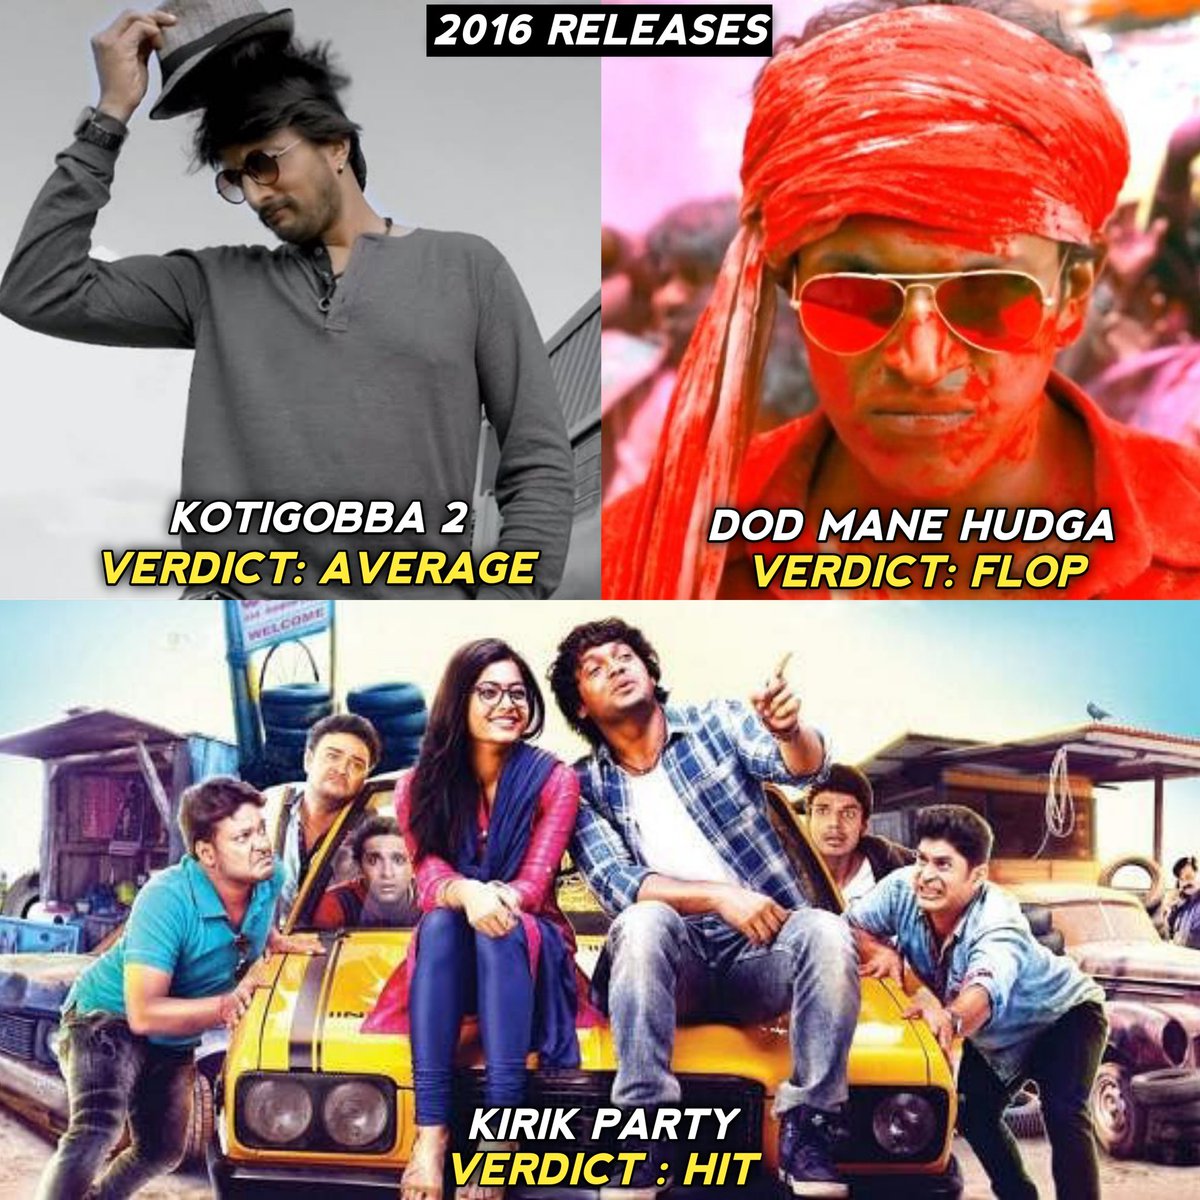 Highest Grosser of the year 2016 : #KirikParty with ~45CR 

No of HGOTY from KFI actors
#DBoss - 7 ❤️‍🔥
#Yash - 3
#RakshithShetty - 1
#Puneeth - 1
#Sudeep - 0

End of the debate! #Kaatera ⏳